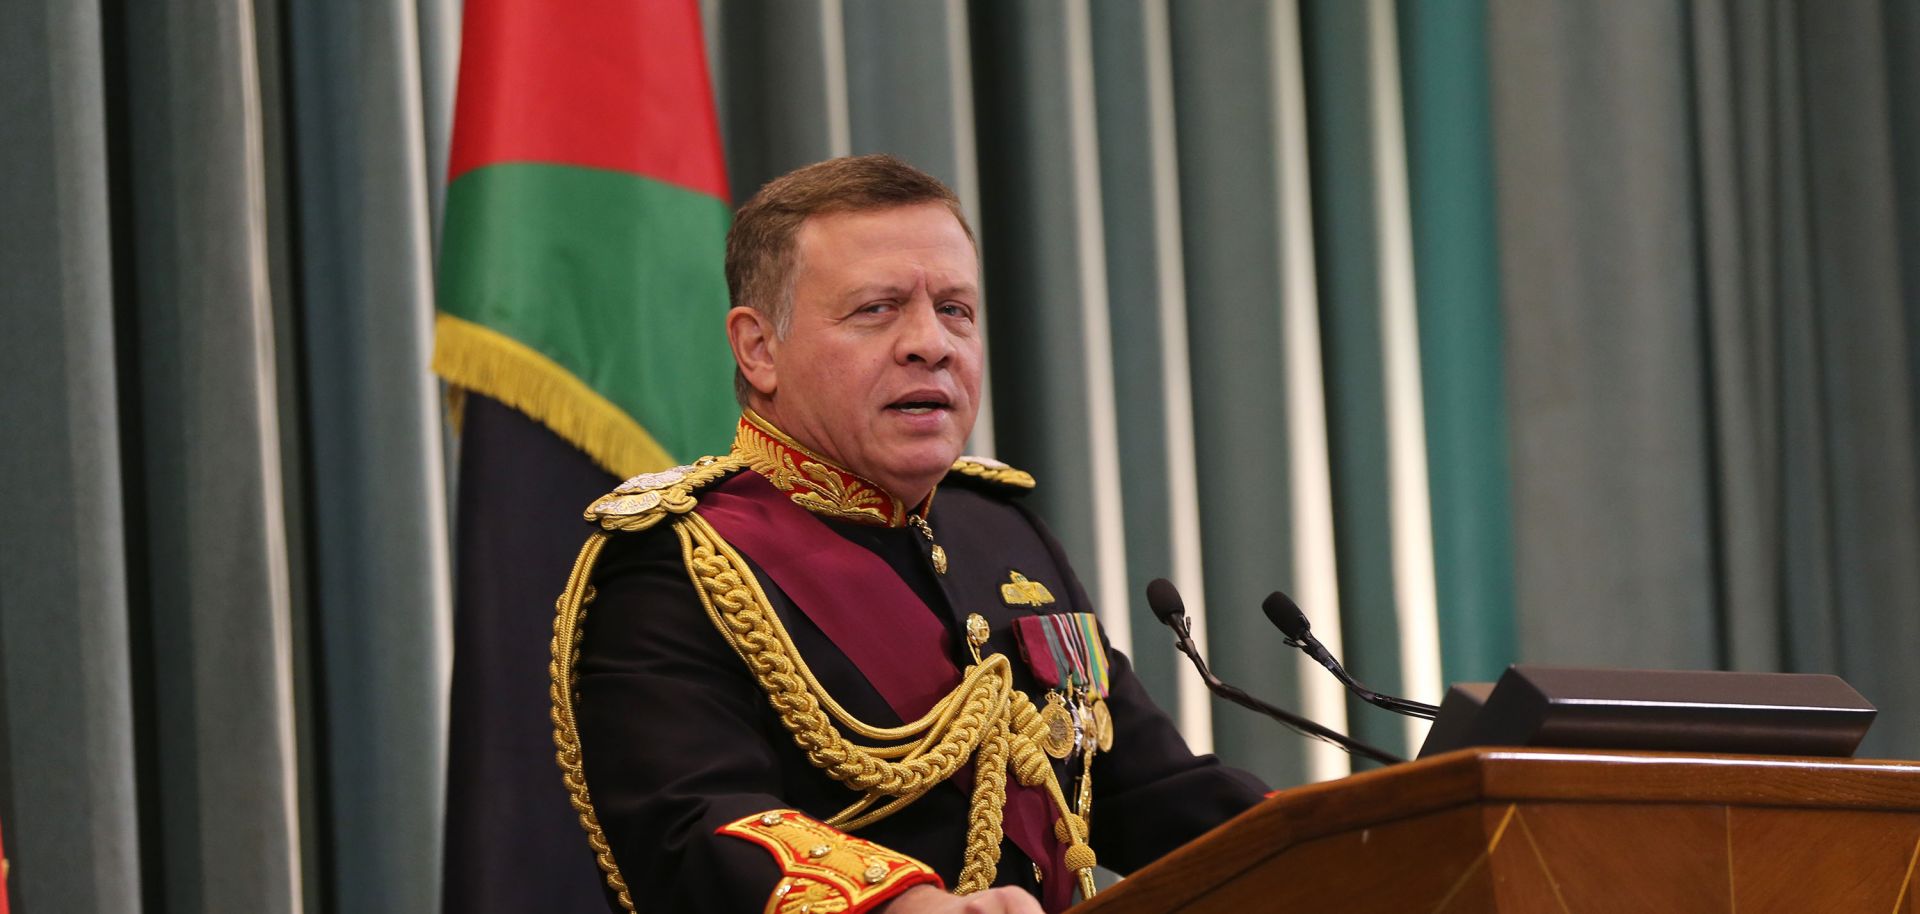 Jordan's King Abdullah II attends the opening of the country's parliament in 2016 in Amman, Jordan. As the economy founders, Jordan is facing the increasing influence of various protesters. 